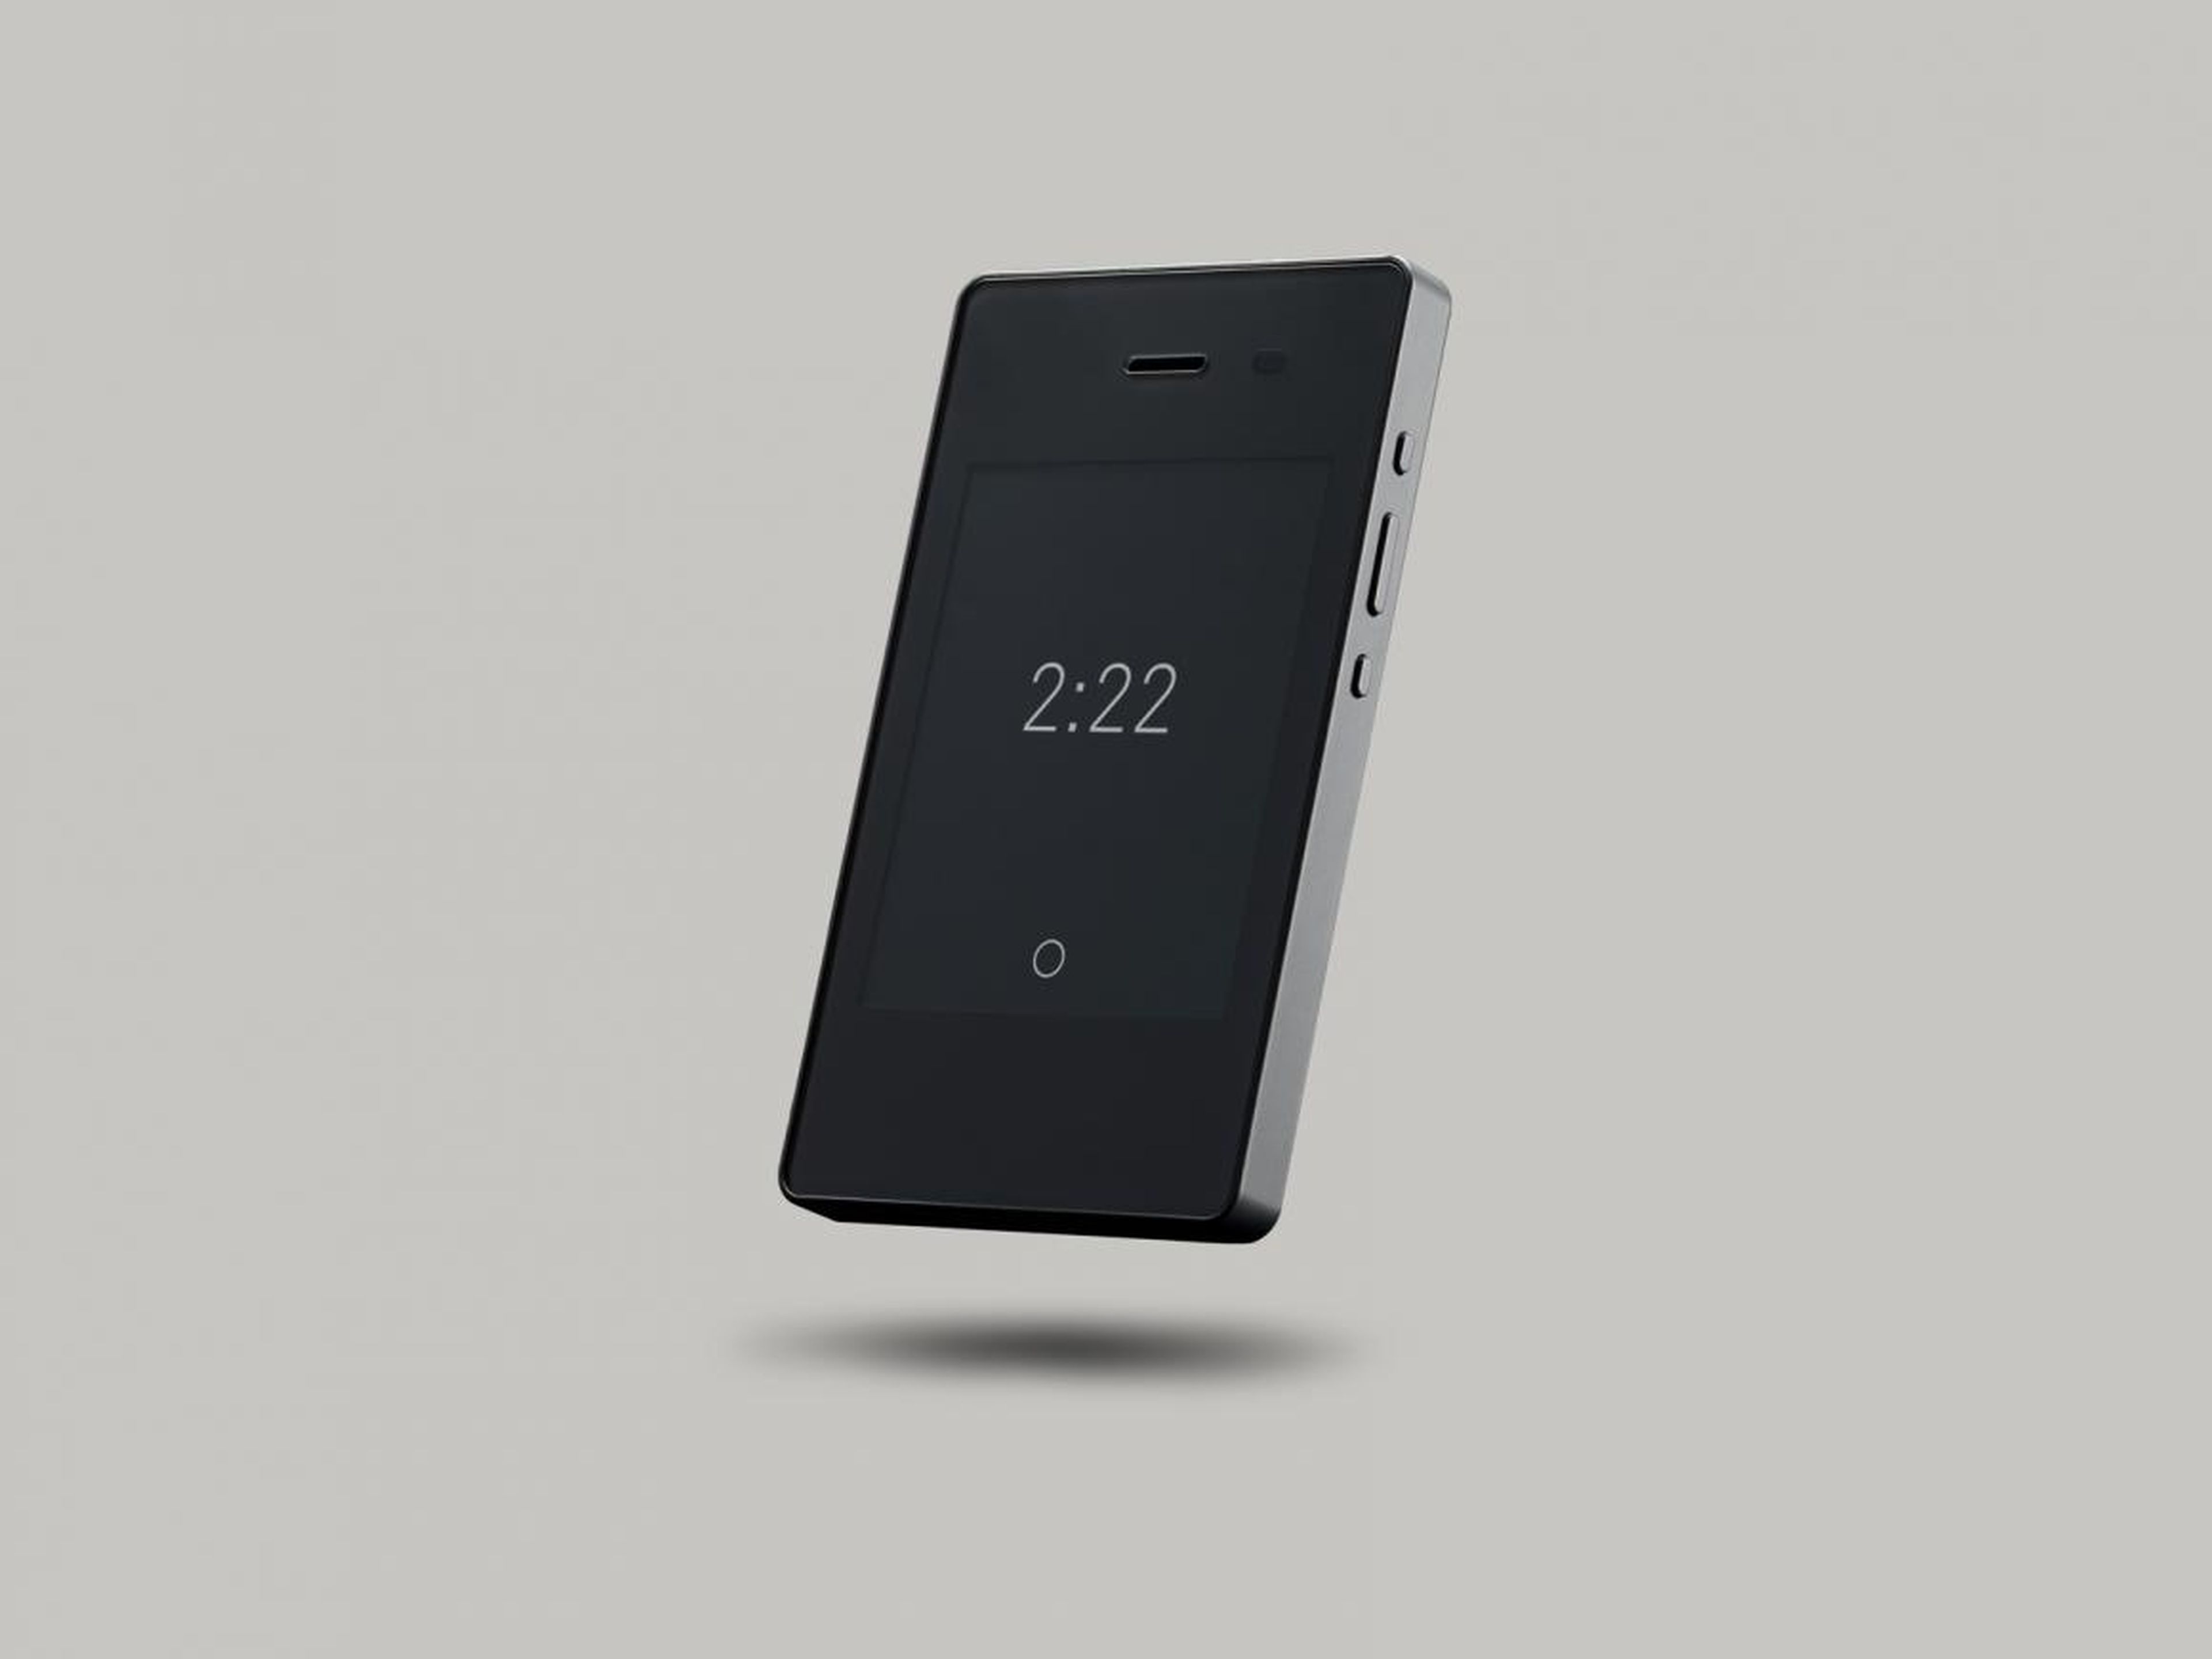 In September, the company unveiled its next product, the Light Phone 2.